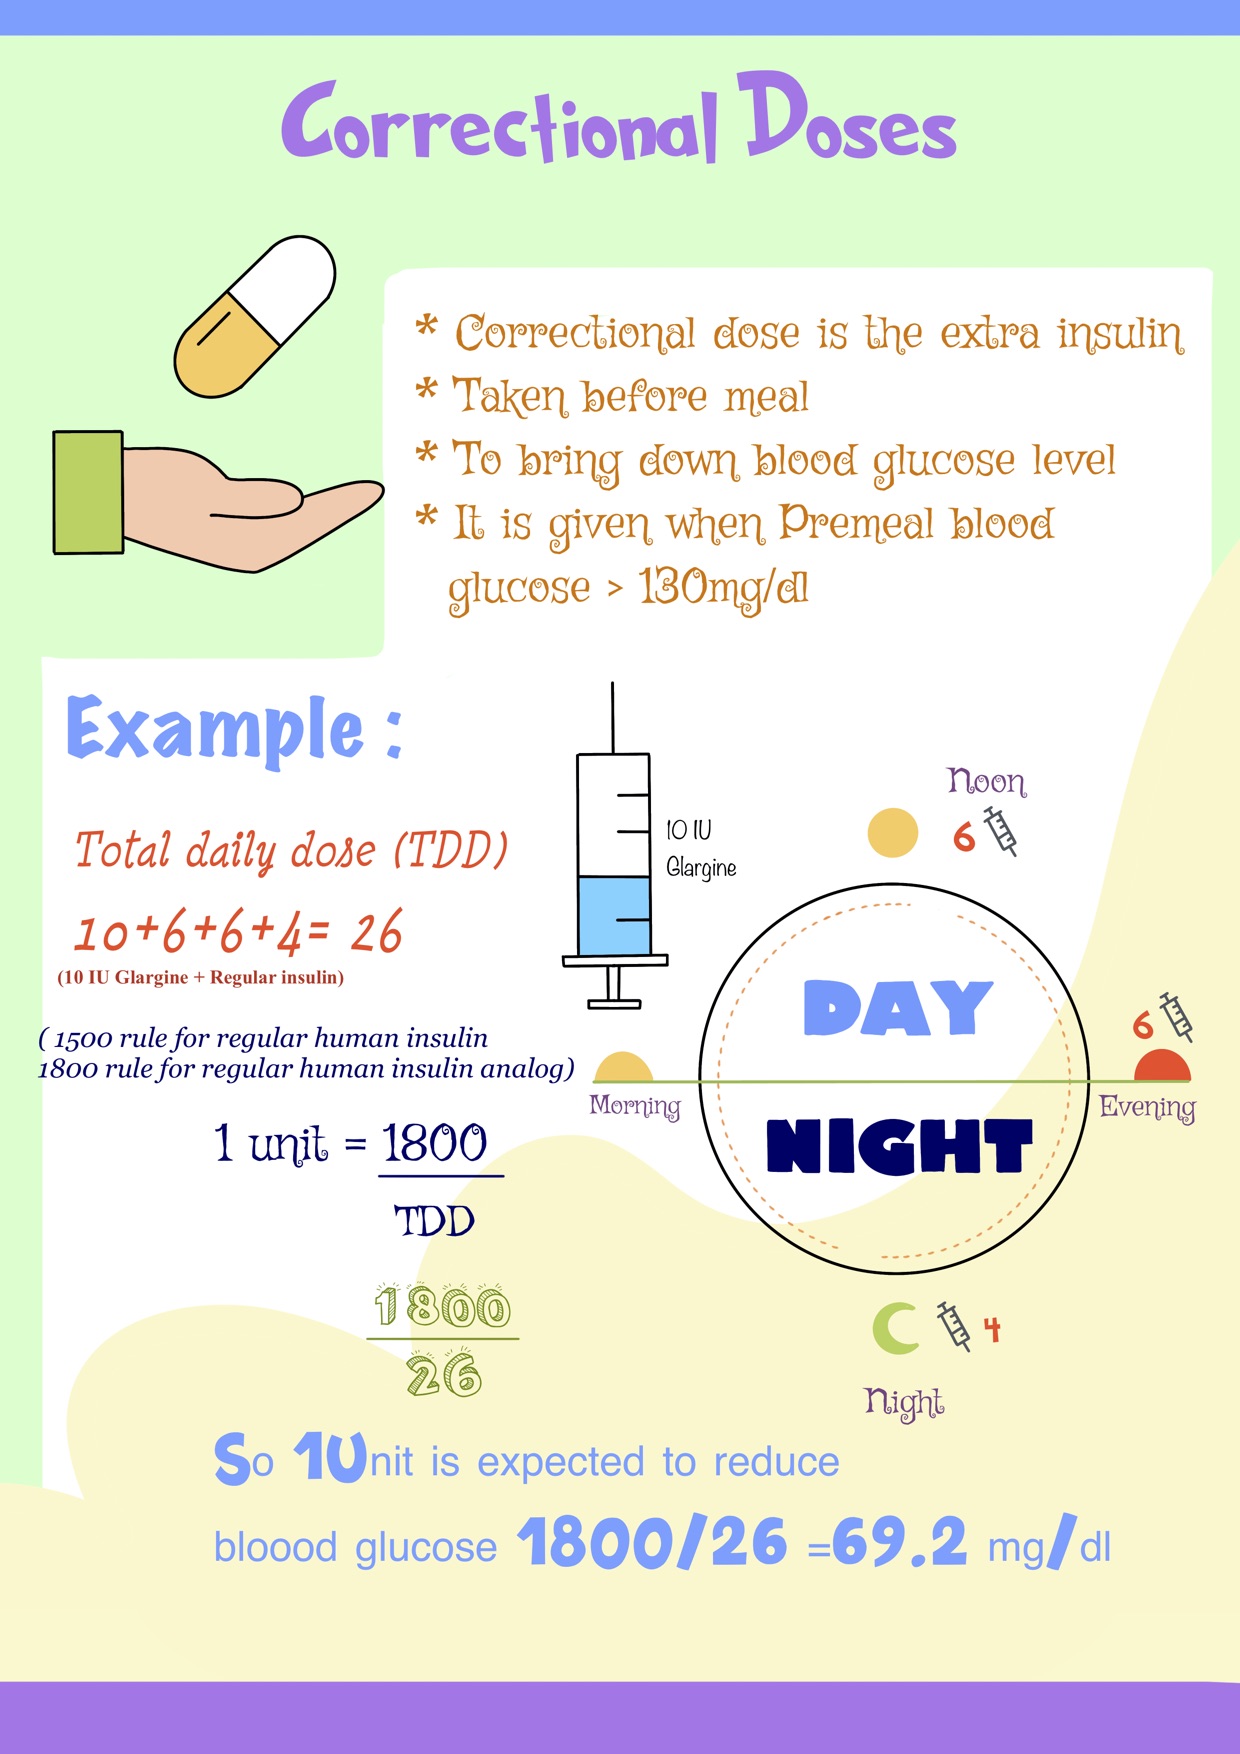 insulin correctional doses for children type 1 diabetes and how to calculate the total daily dose